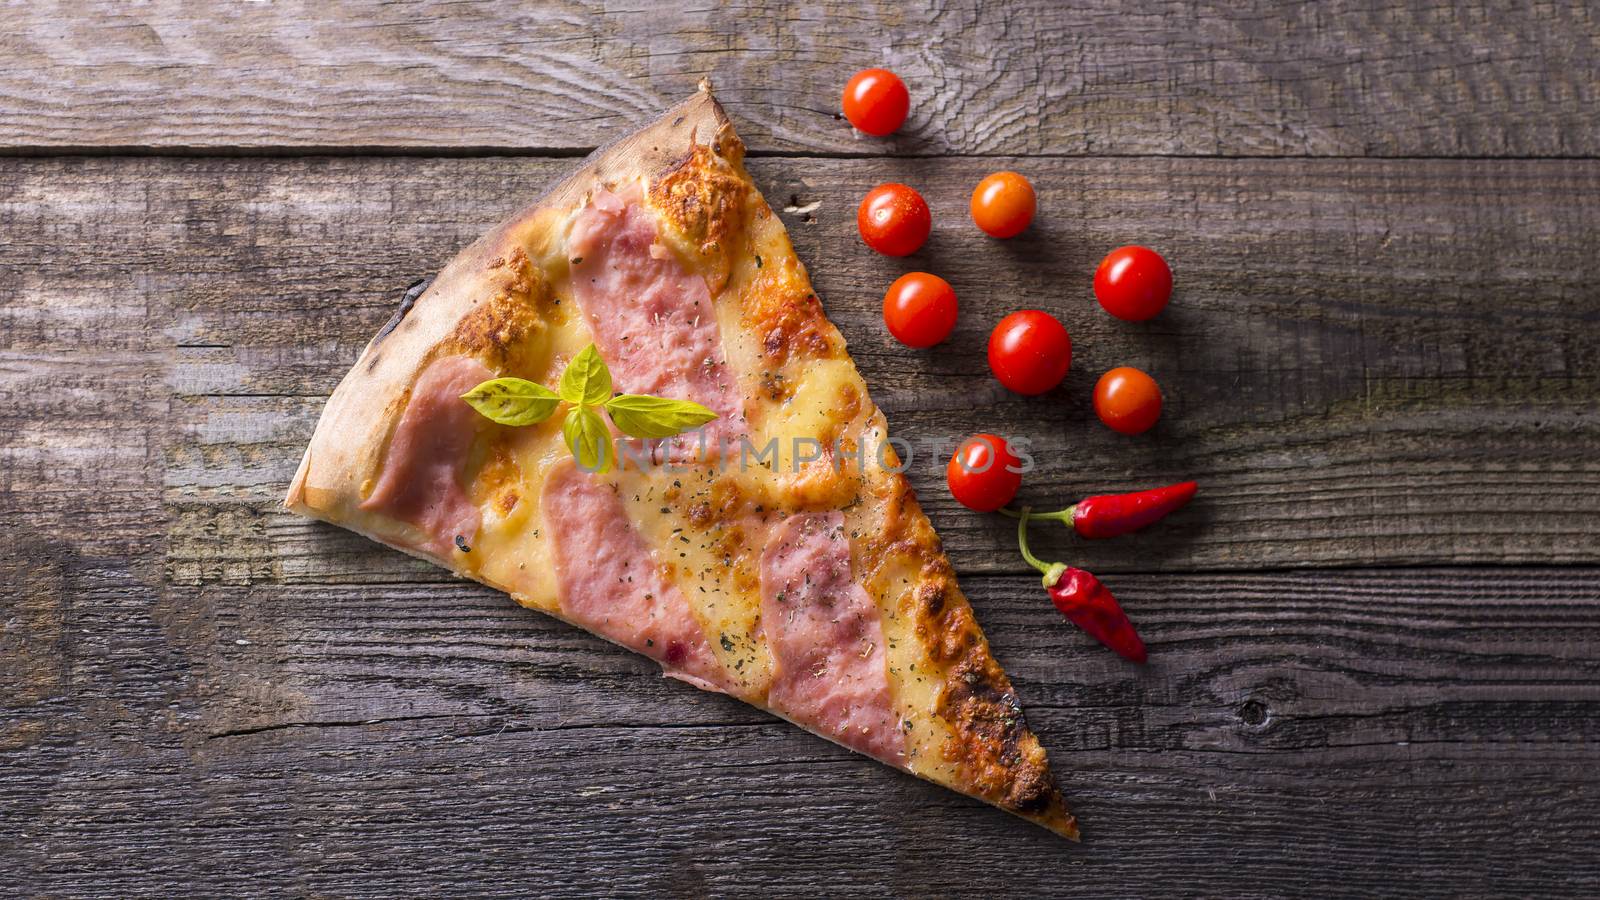 Italian food - pizza on wooden table. Cherry tomato and hot peppers